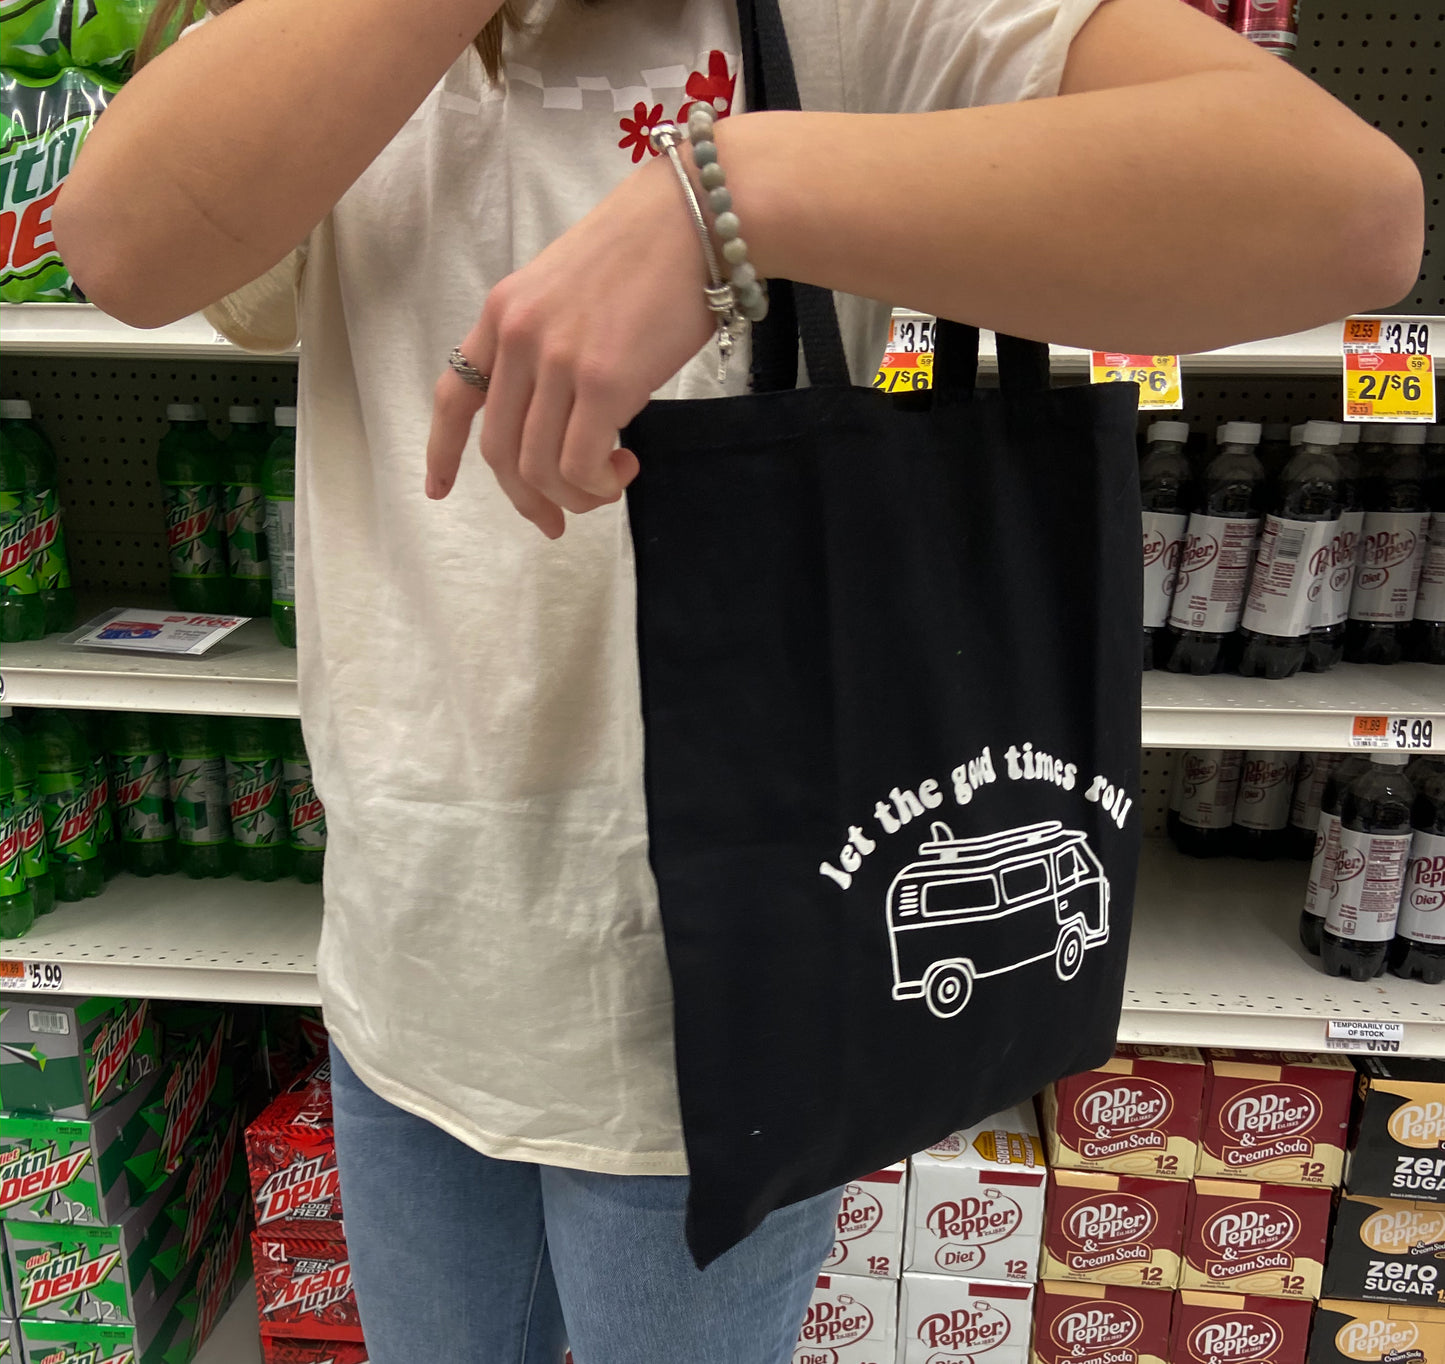 Good Times Roll - Tote